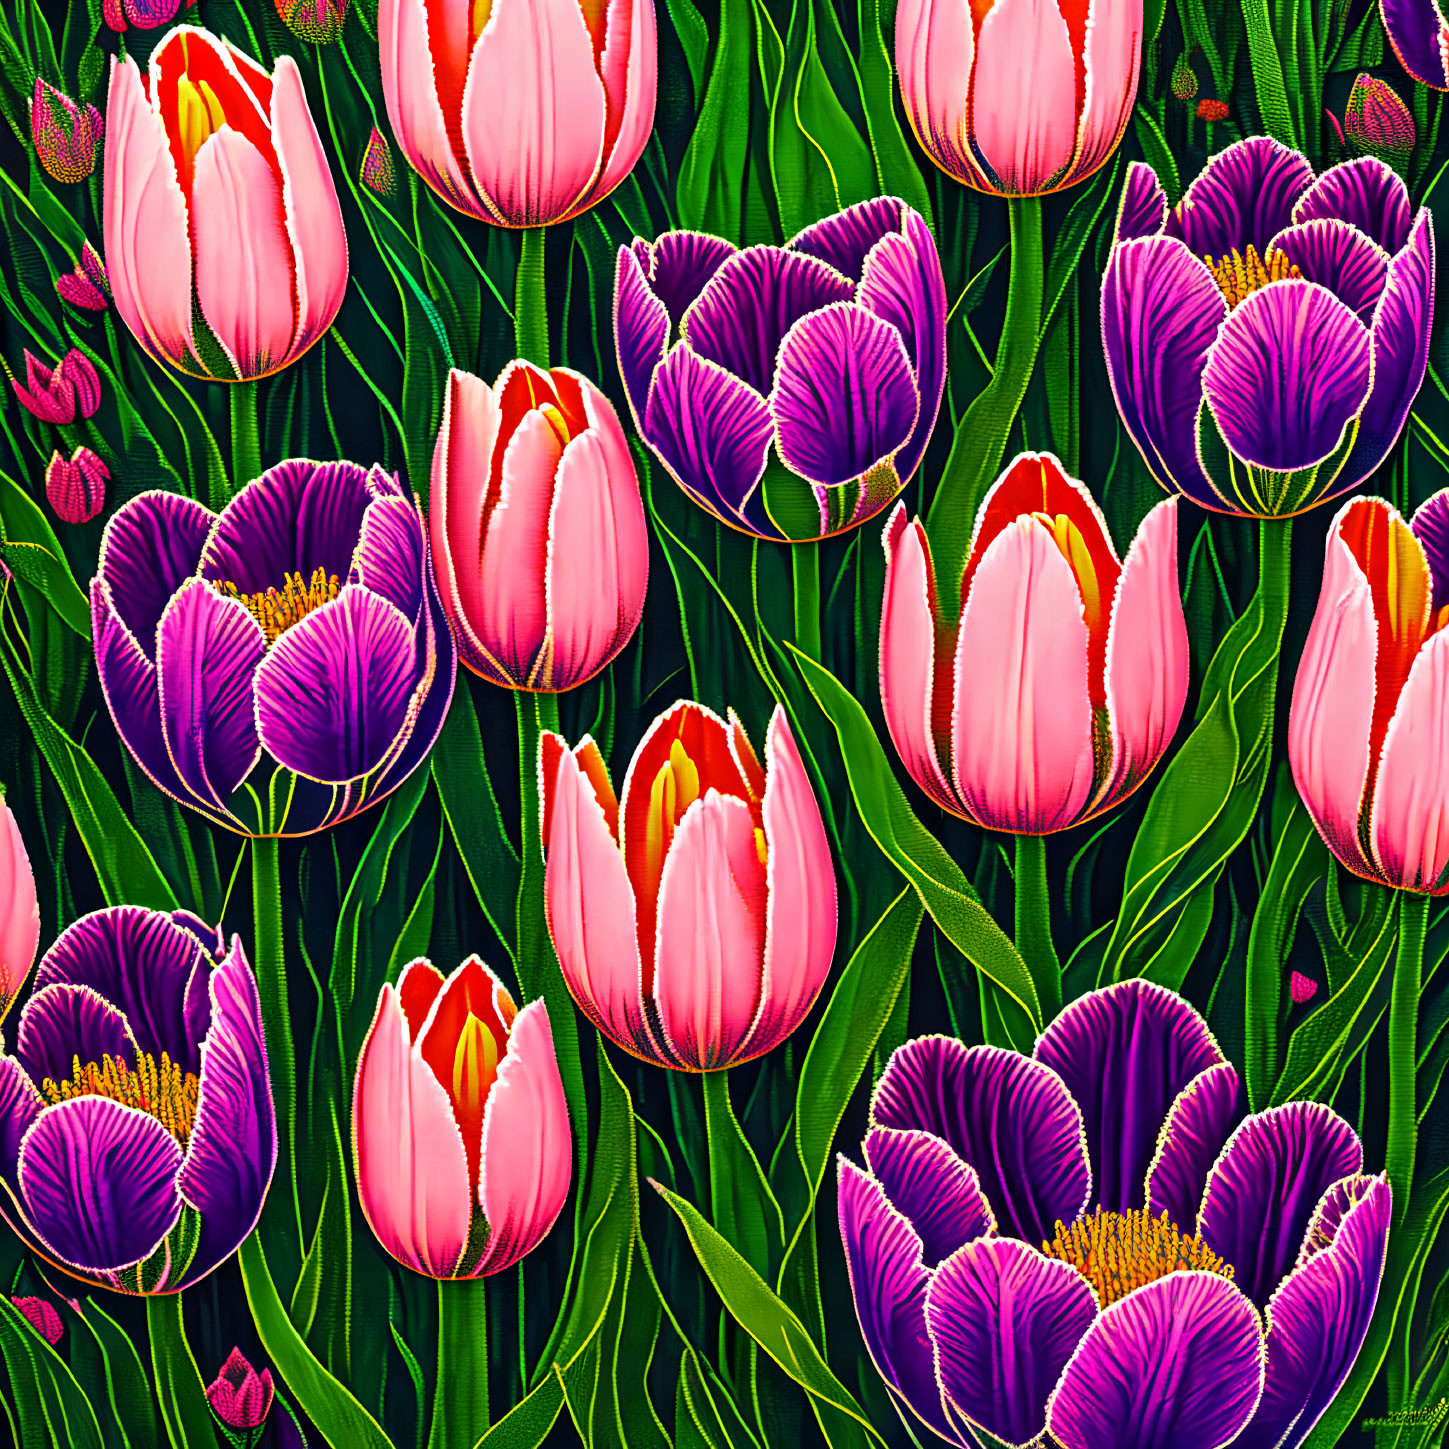 Colorful tulip field illustration with pink and purple flowers on dark background